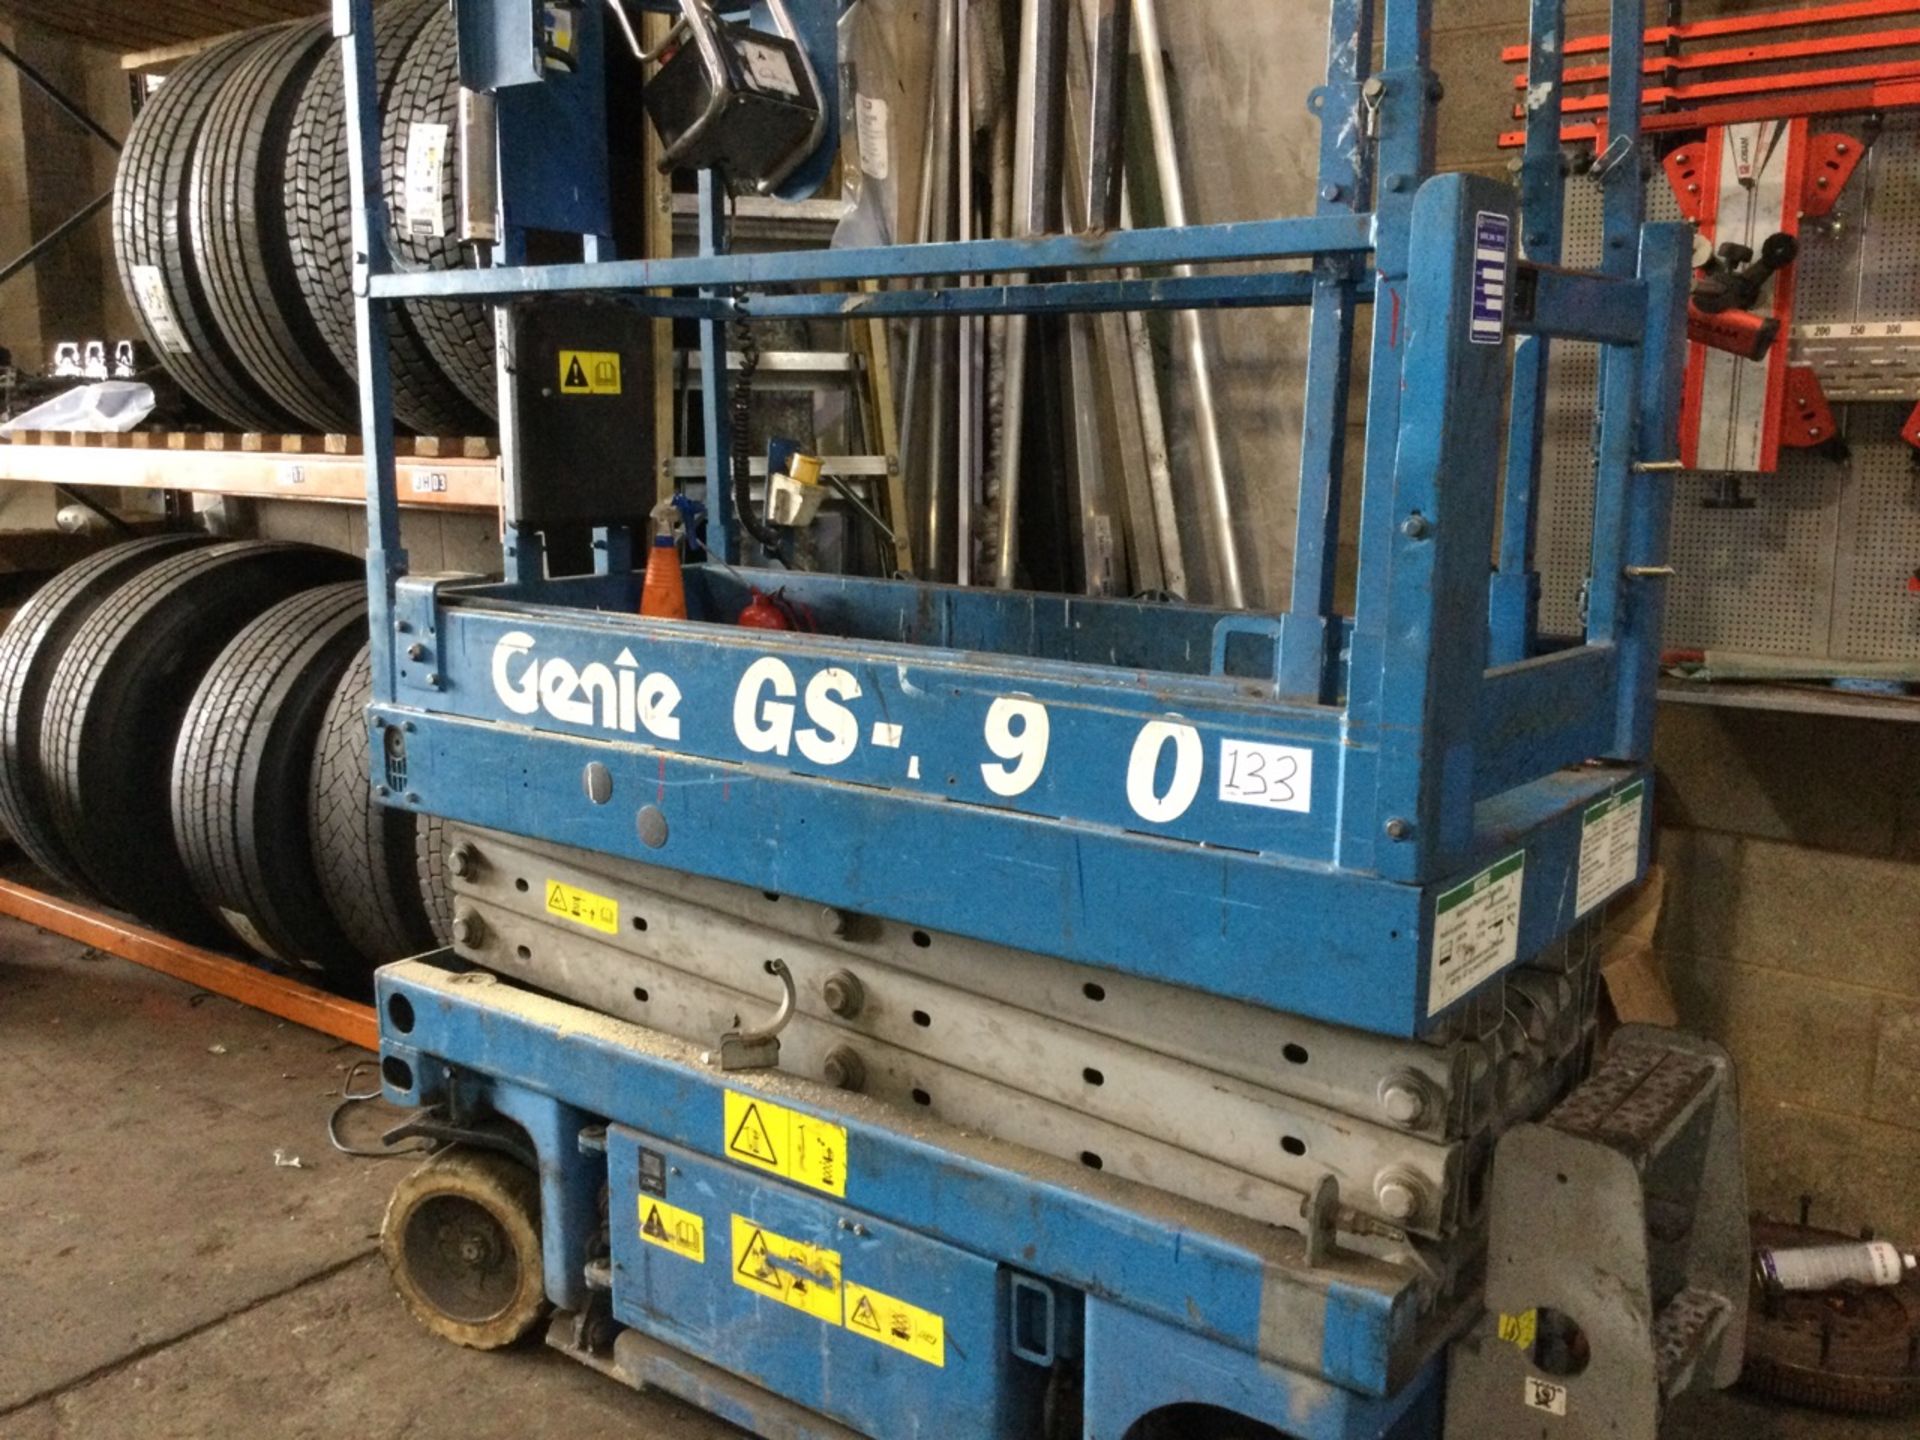 Genie GS-1930 Electric Scissor Lift, serial number UNKNOWN